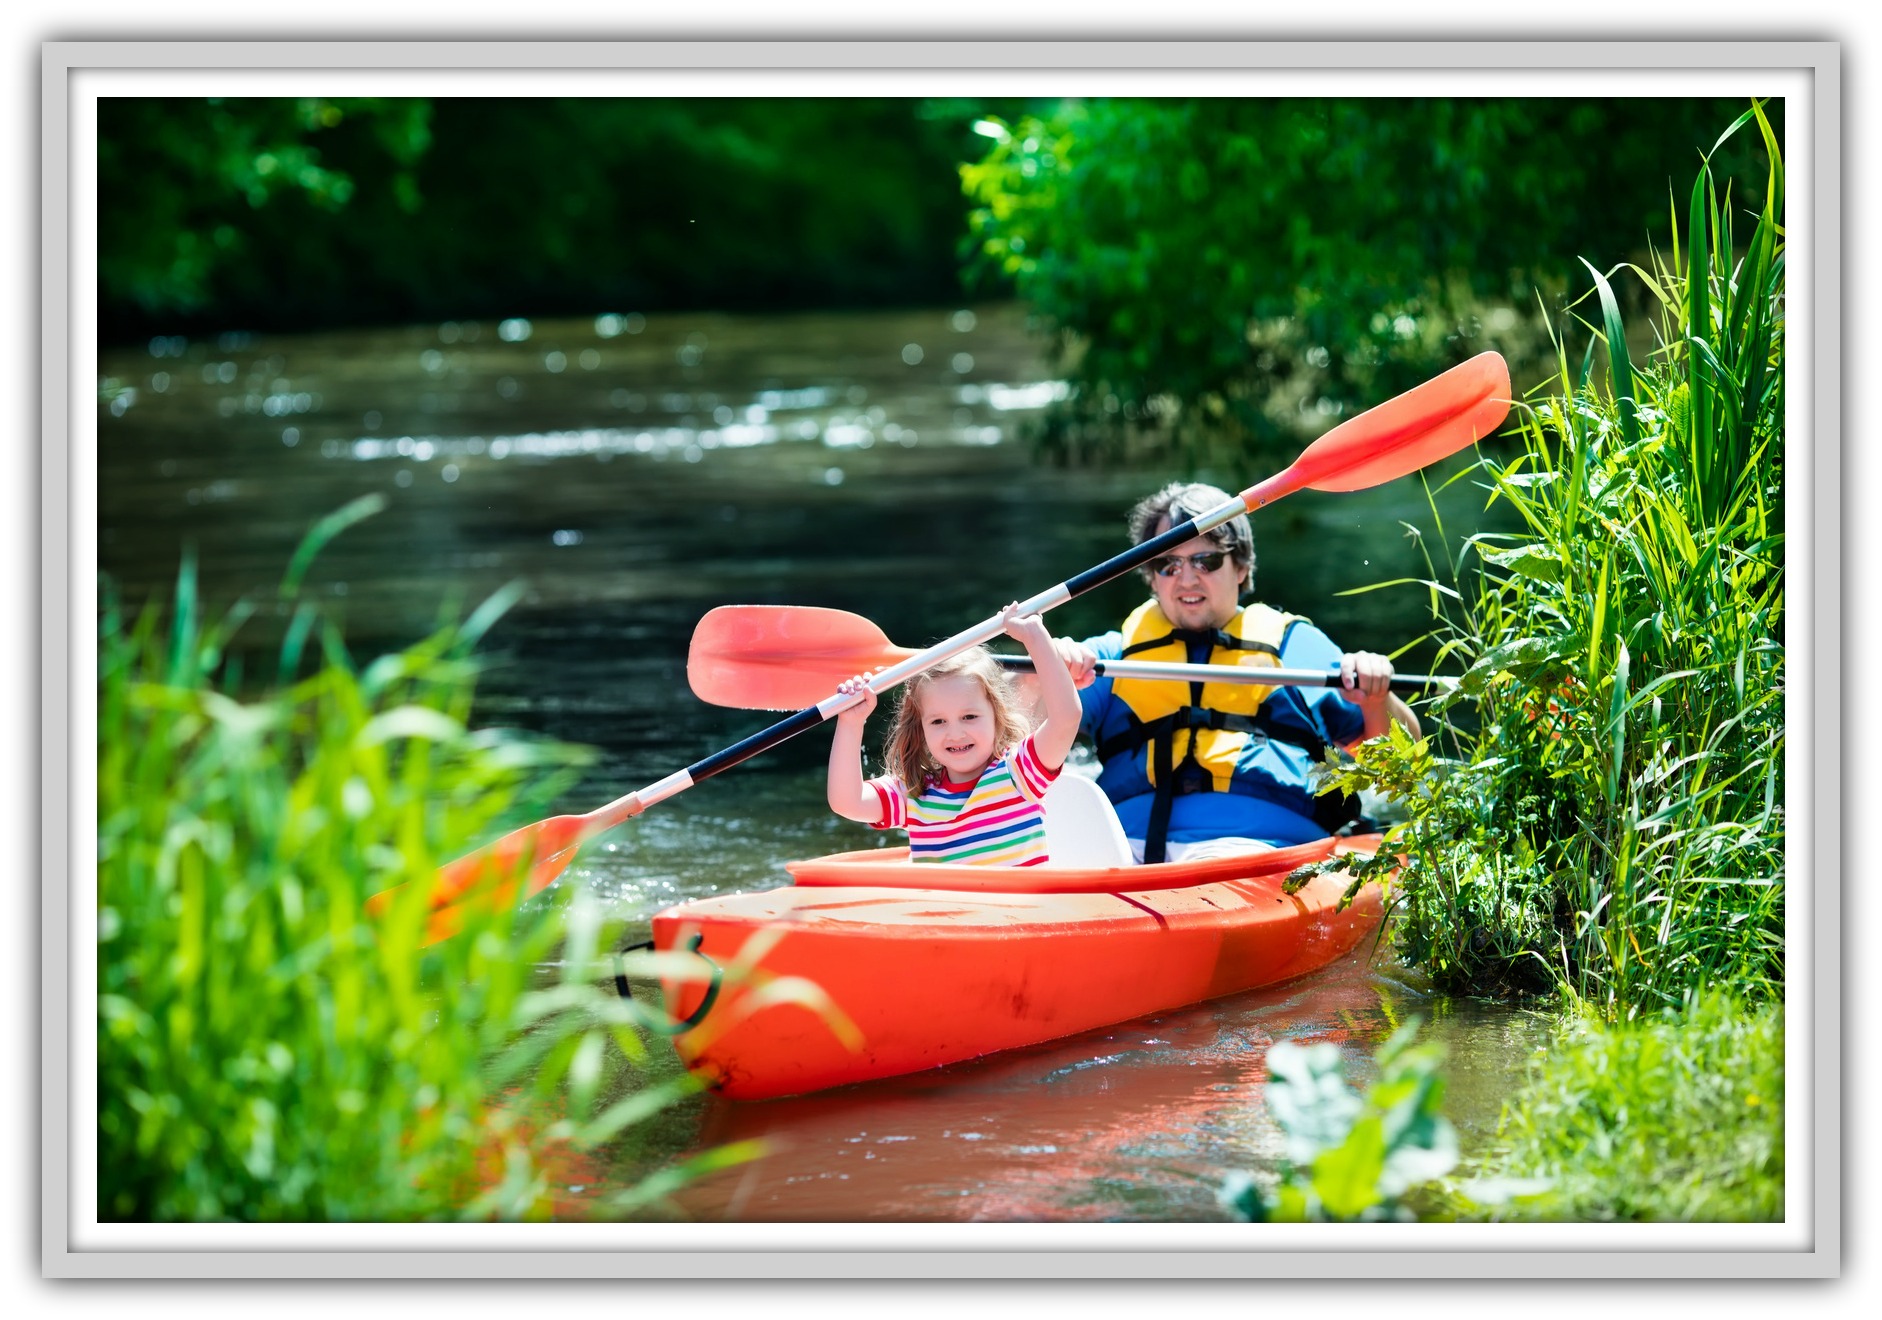 Family on kayaks and canoe tour. Father and child paddling in kayak in a river on a sunny day. Children in summer sport camp. Active preschooler kayaking in a lake. Water fun during school vacation.